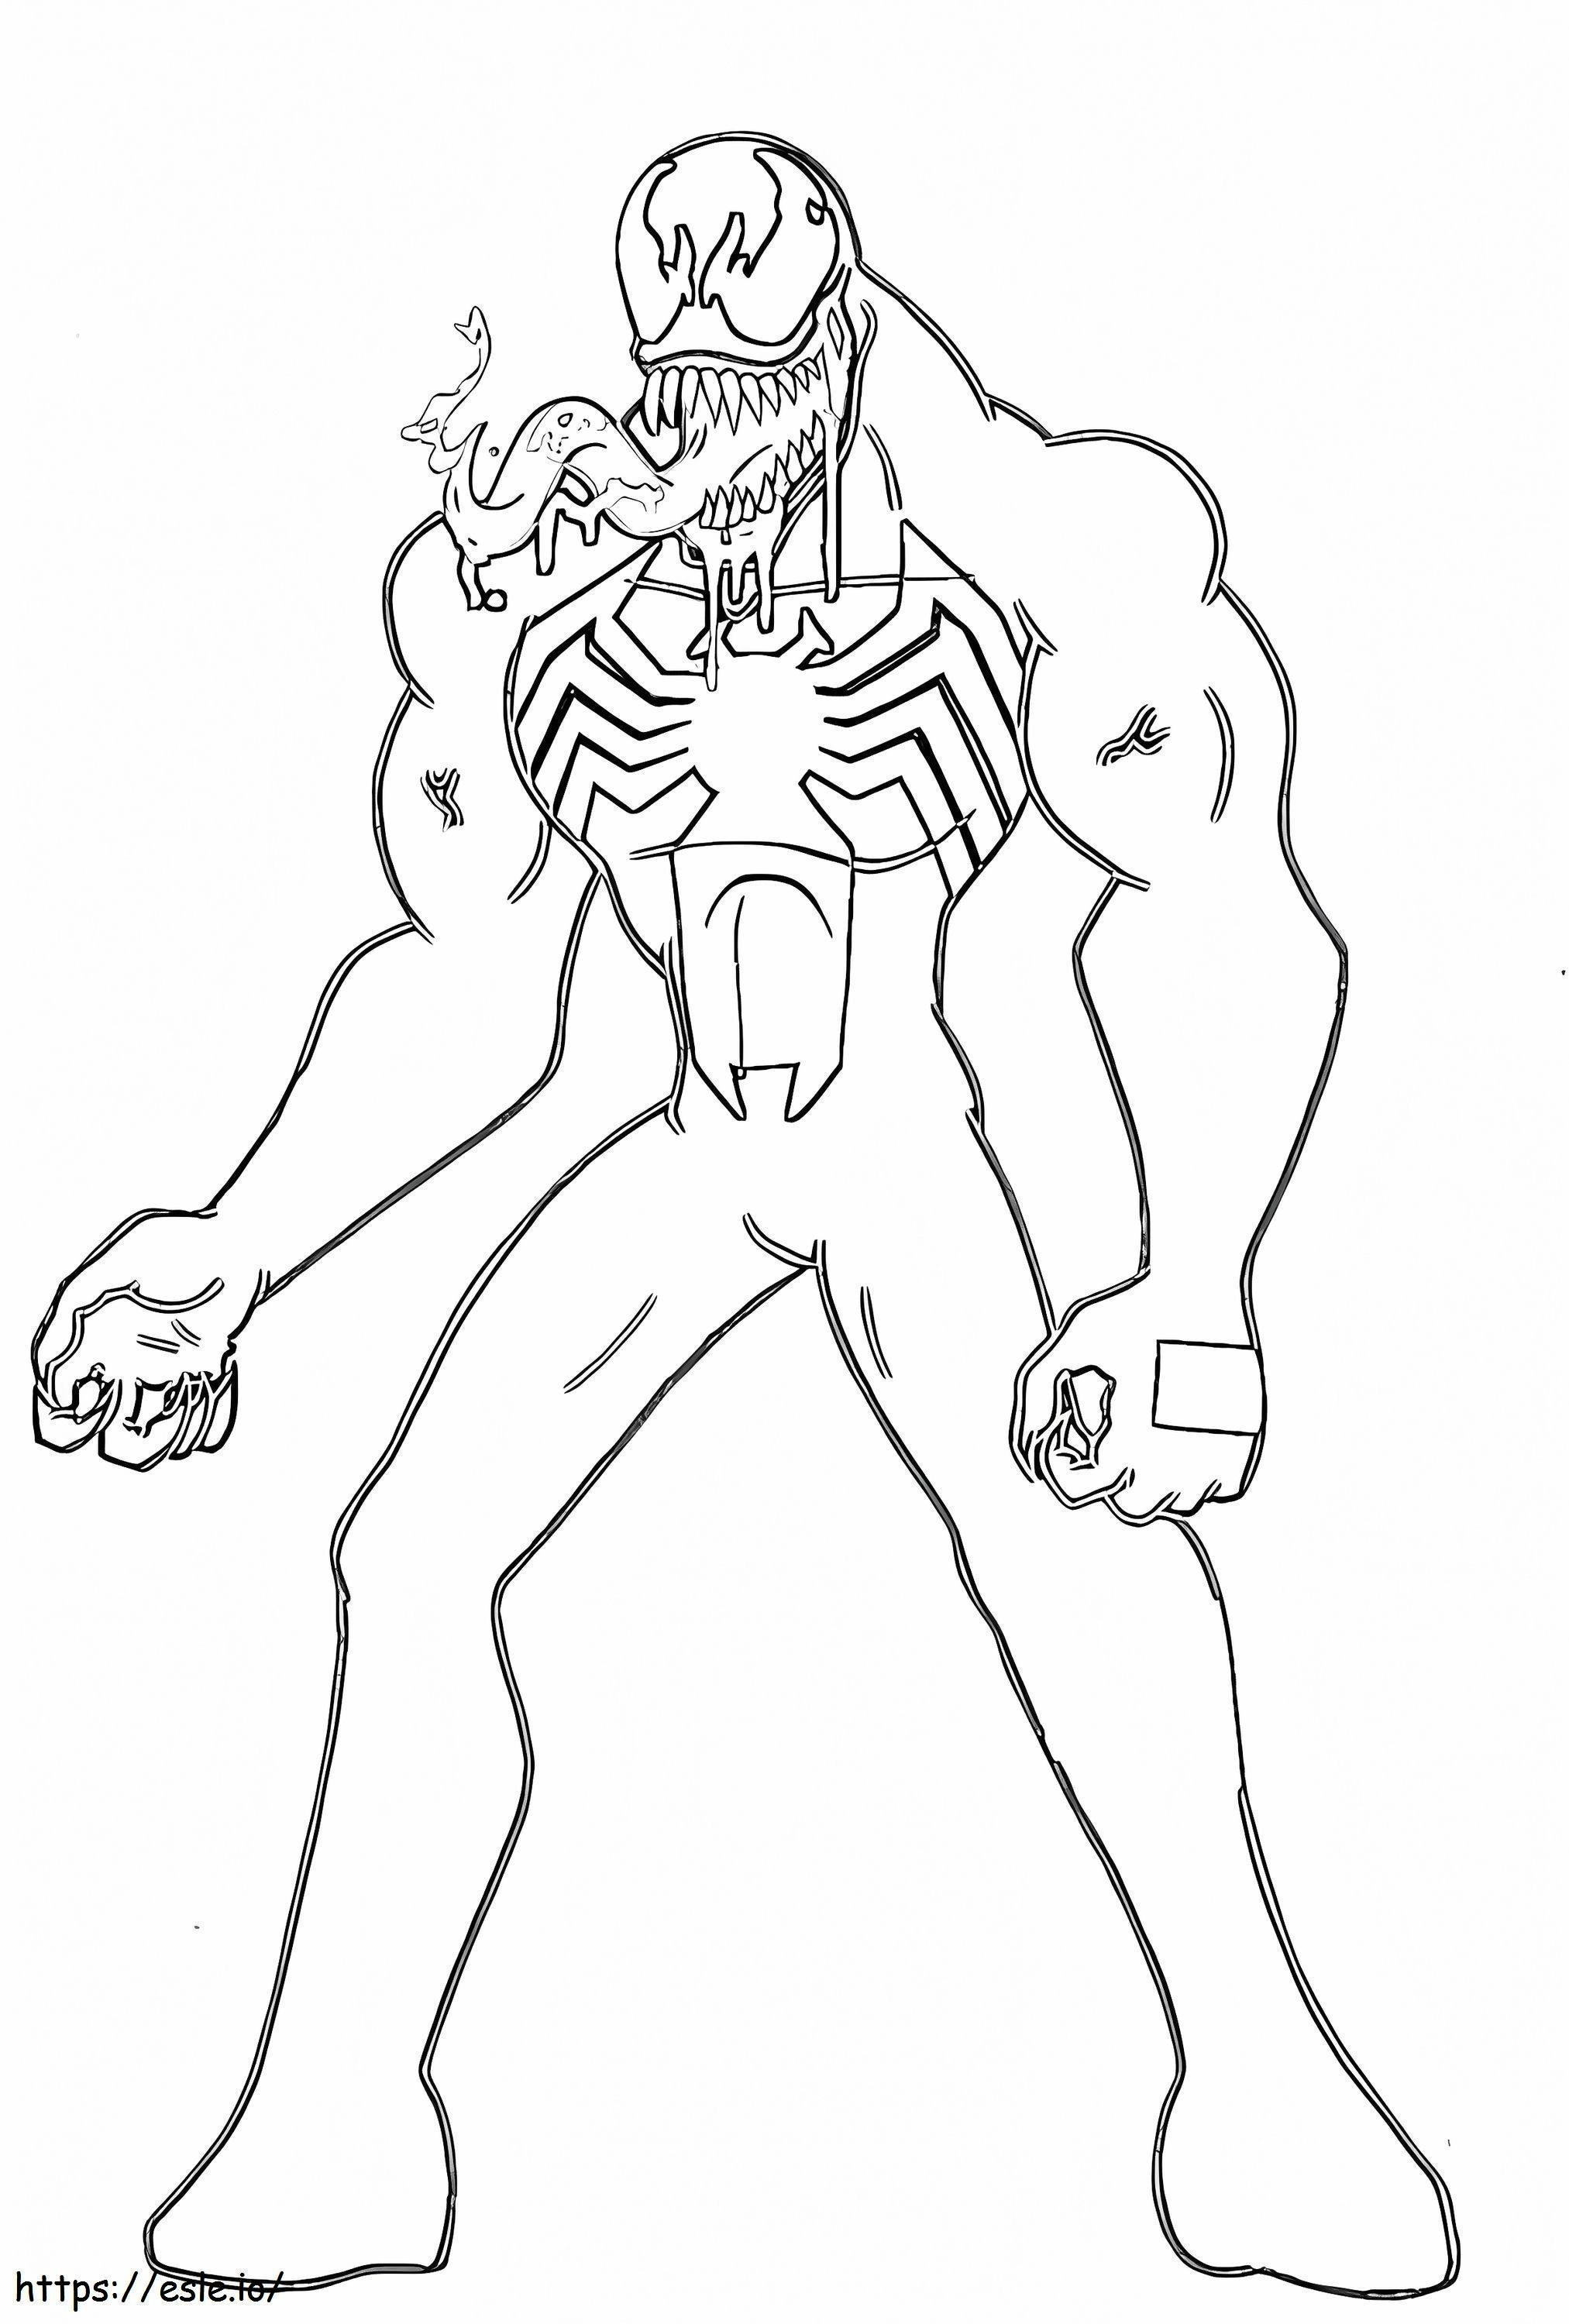 Hungry Venom coloring page